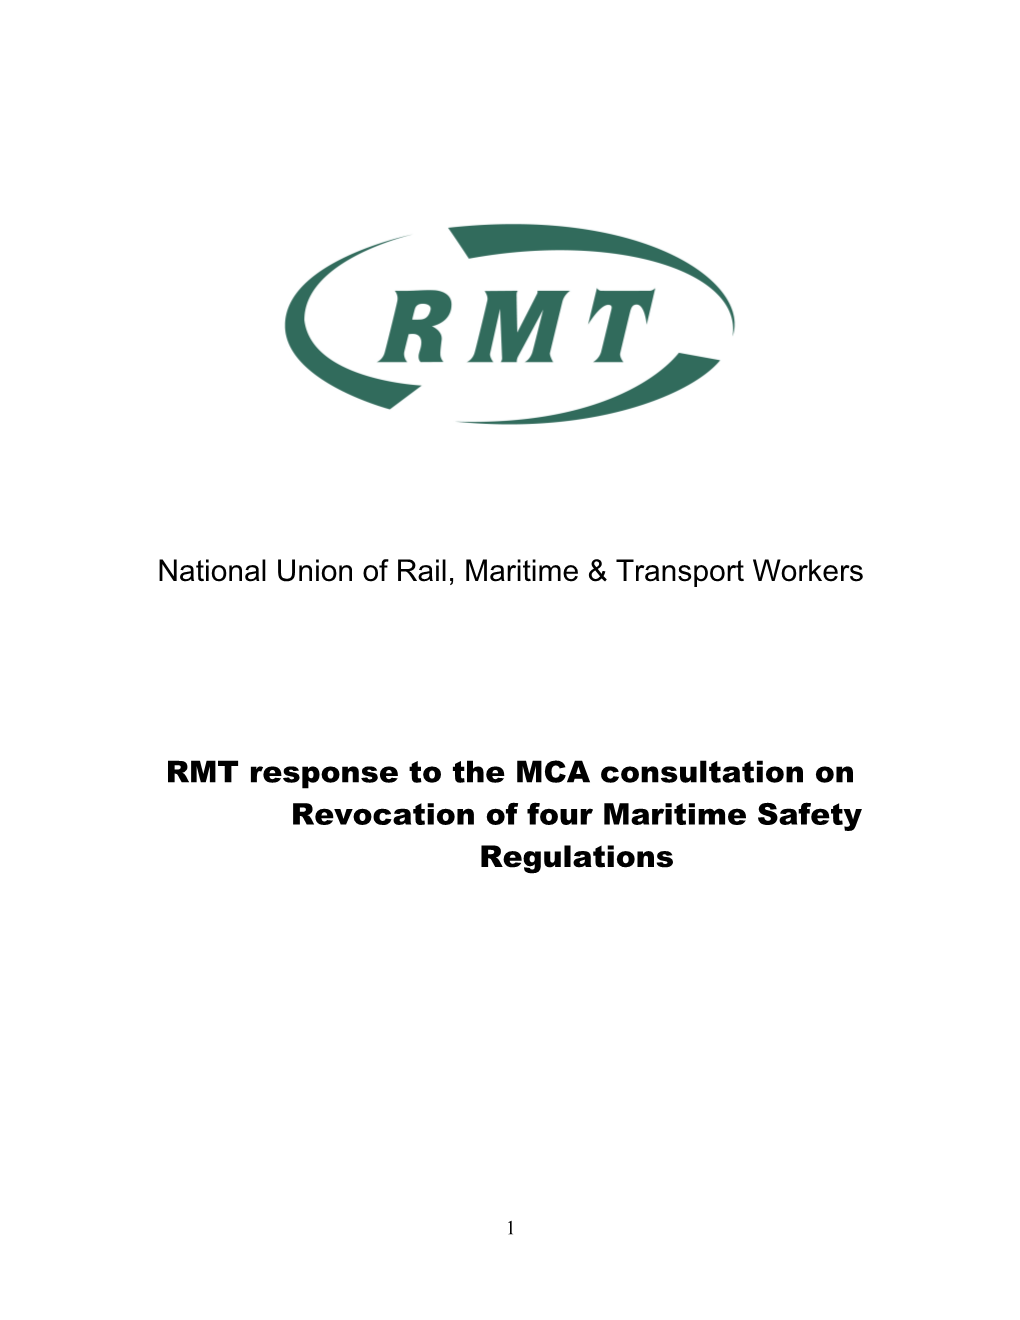 National Union of Rail, Maritime and Transport Workers